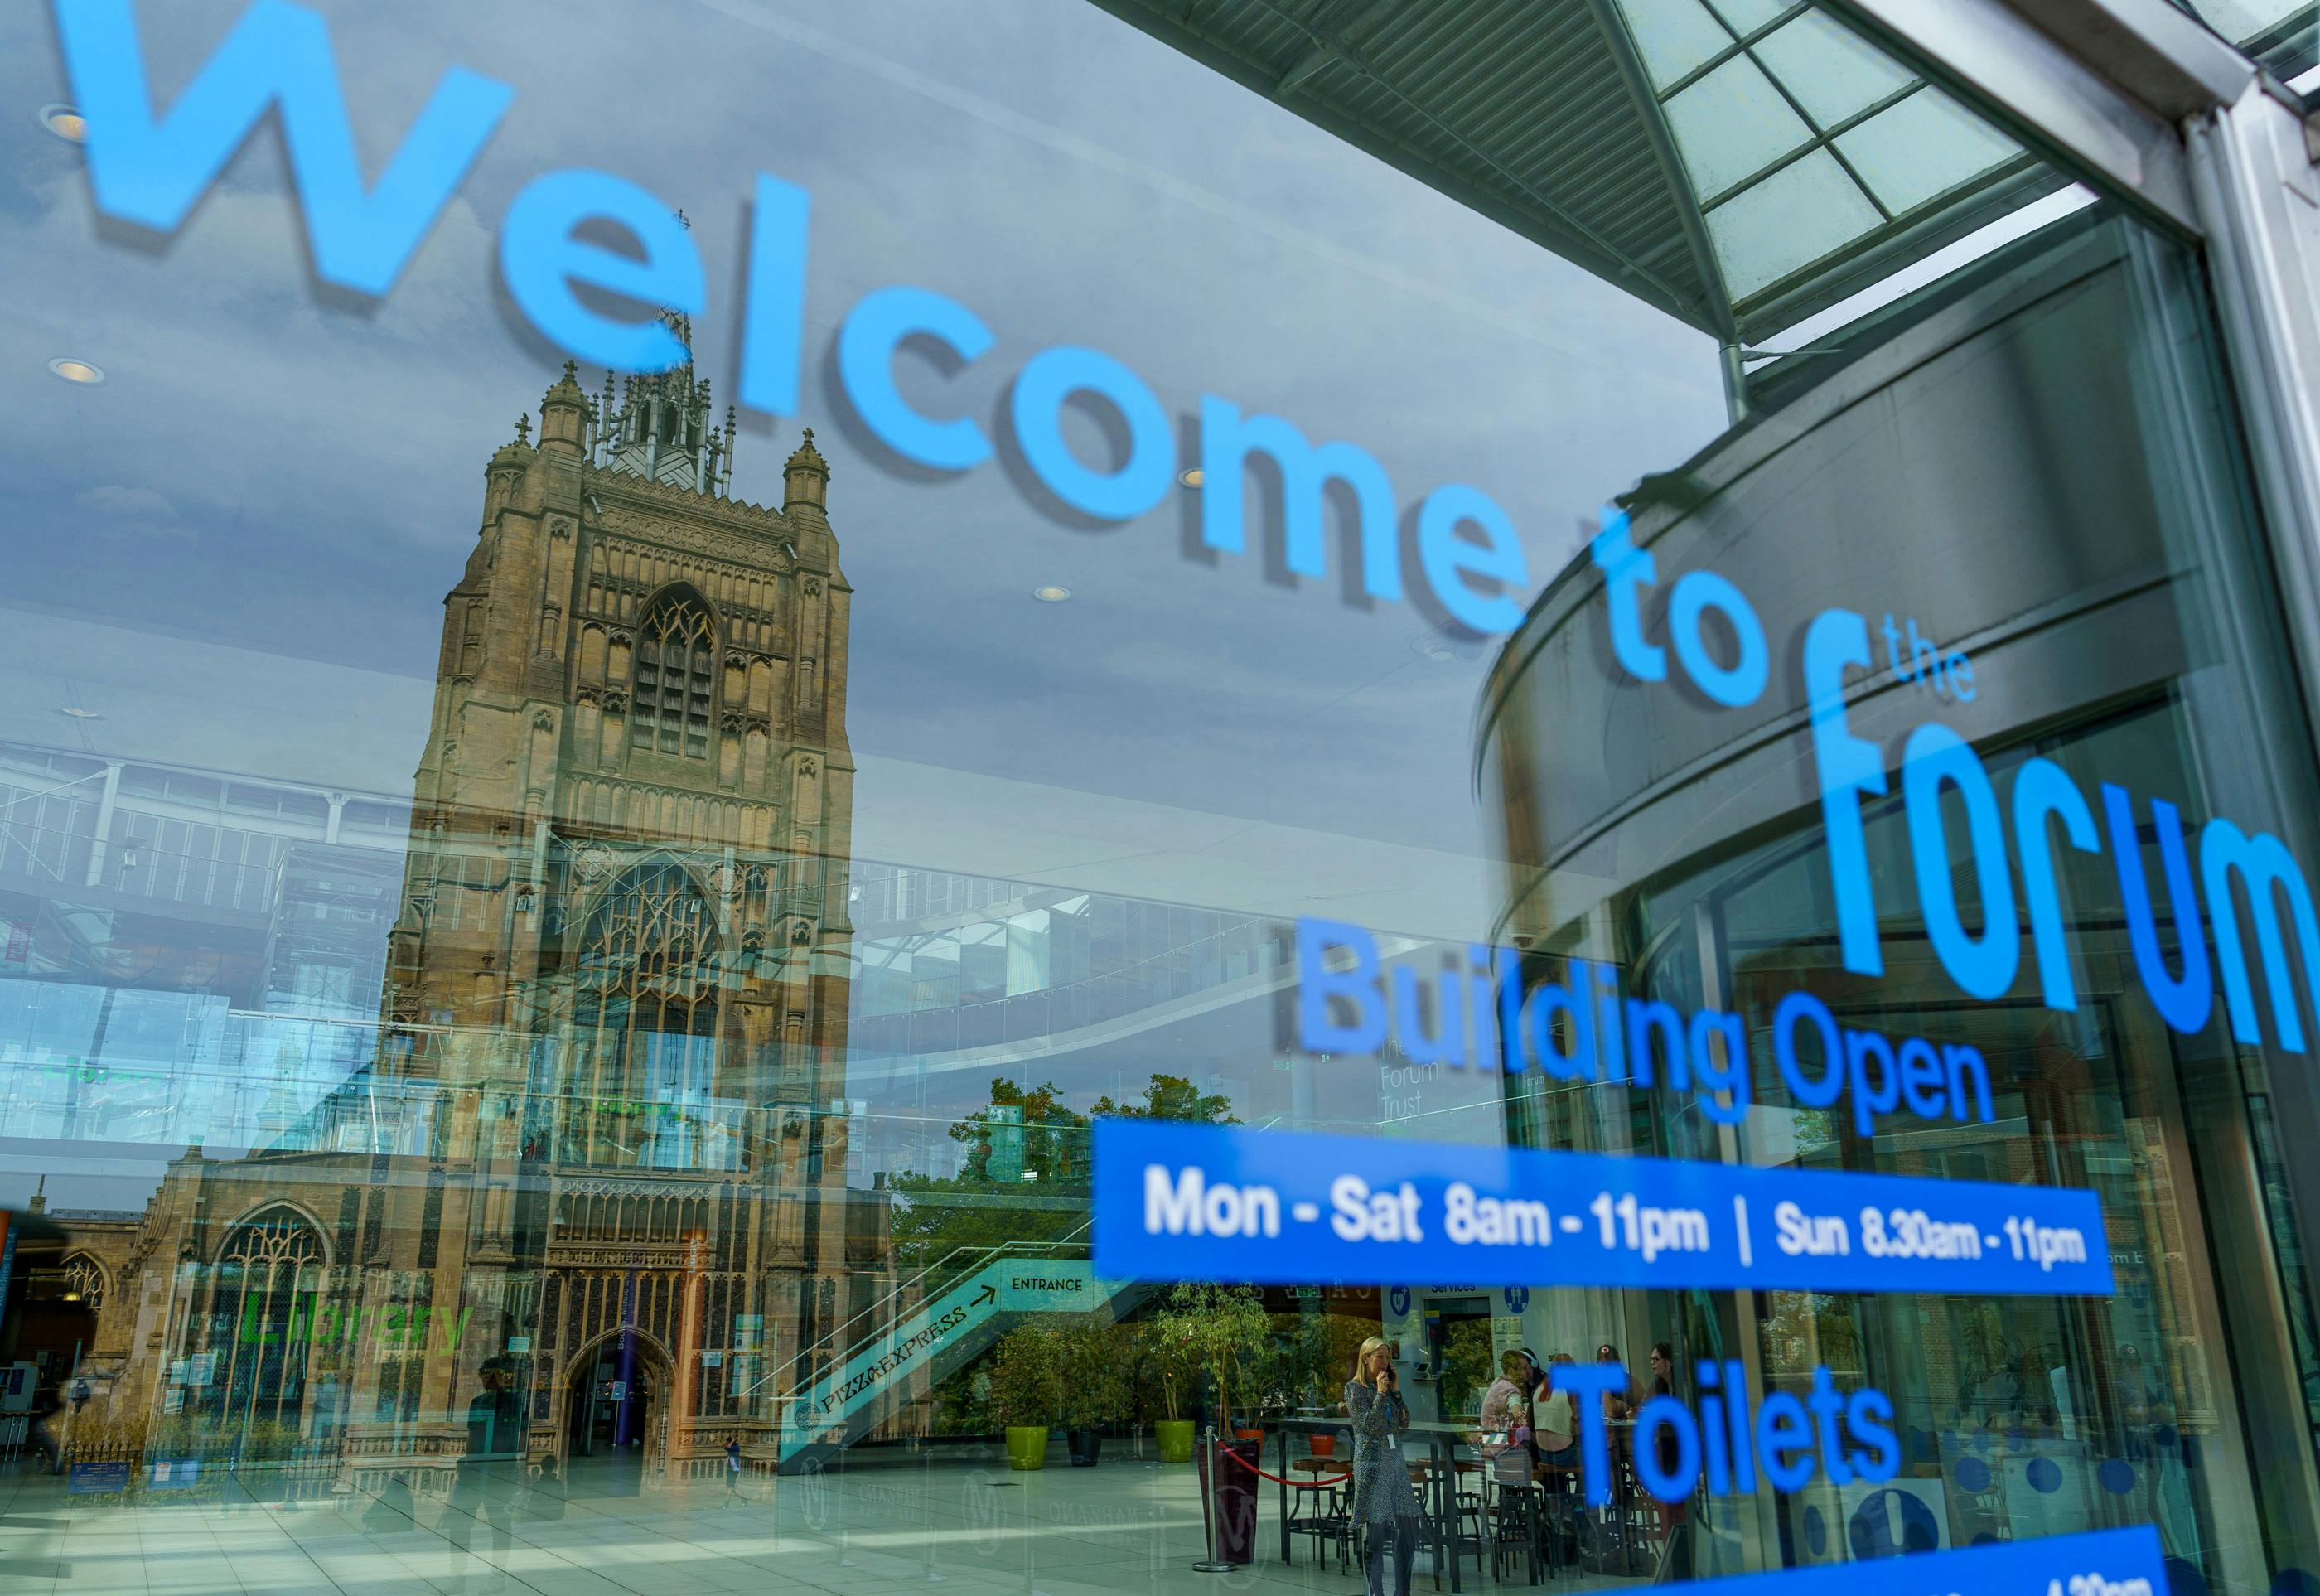 A close up of glass welcome sign at The Forum with a reflection of St Peter Mancroft church